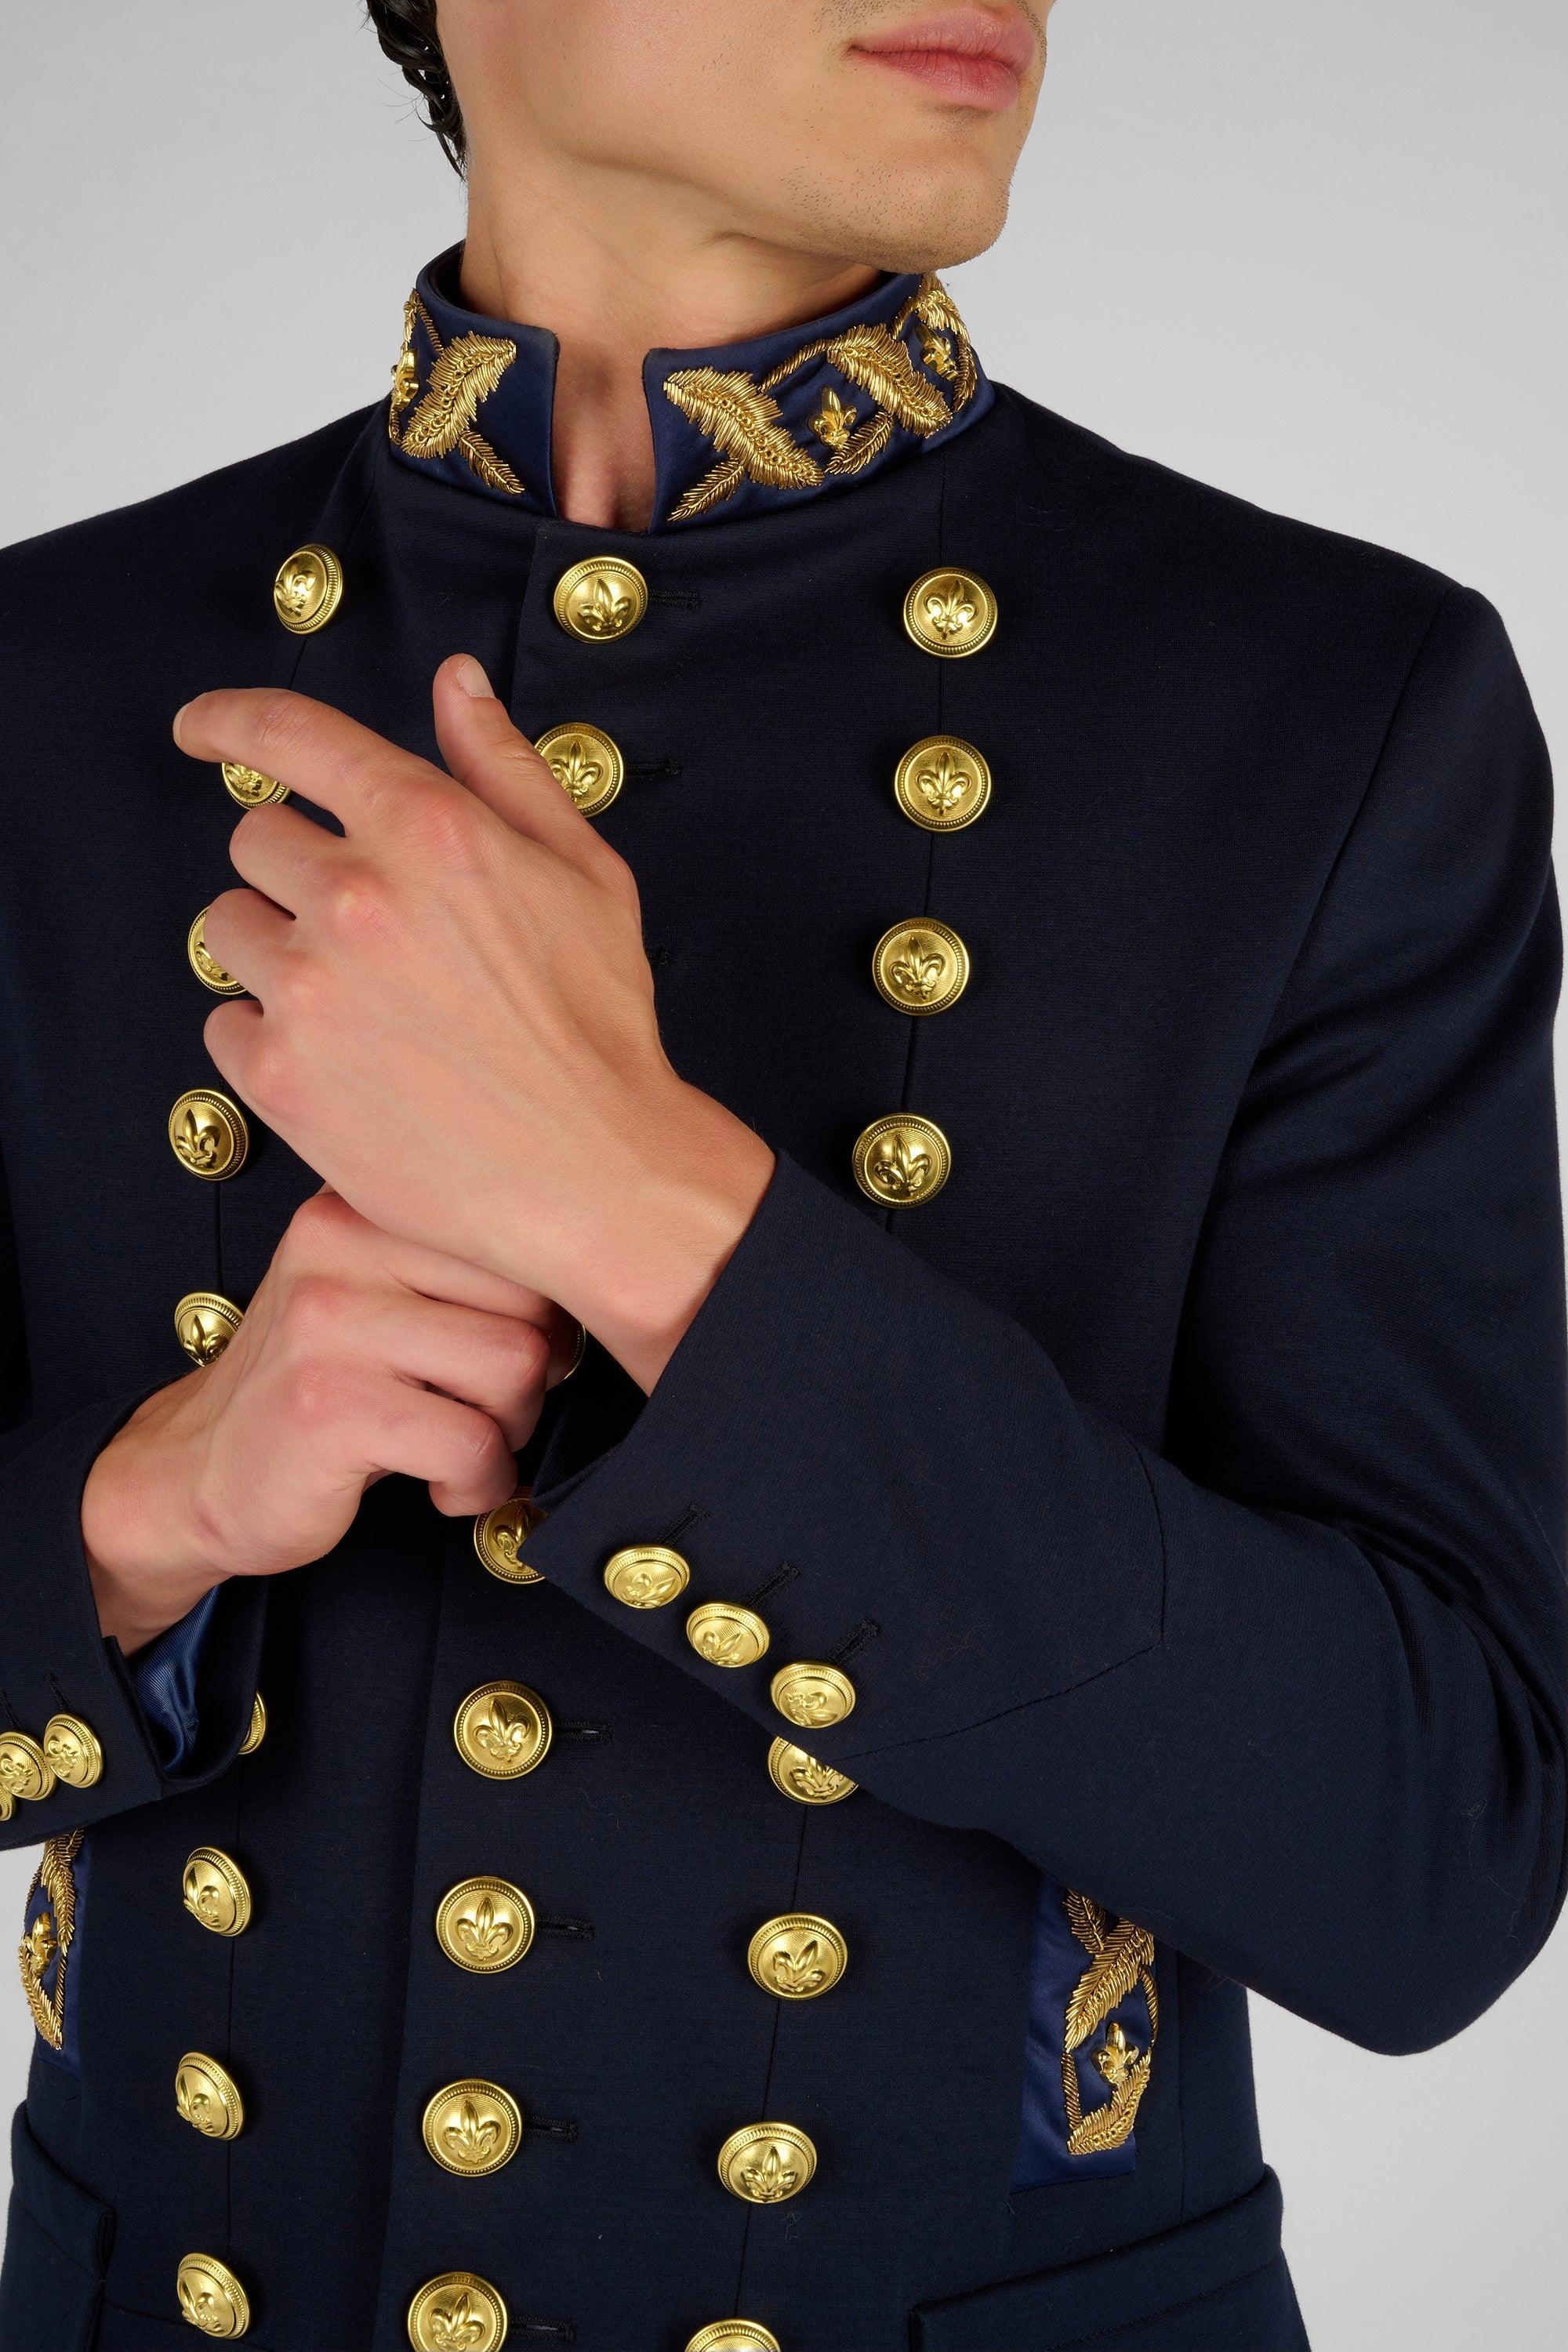 MANTEAU MILITAIRE BRODE LONG - Lords & Fools broderies, dandy, frenchstyle, menfashion, militaire, Mood_Military, paris, parisianstyle, S24, suit, SUMMER 2024, tailoring